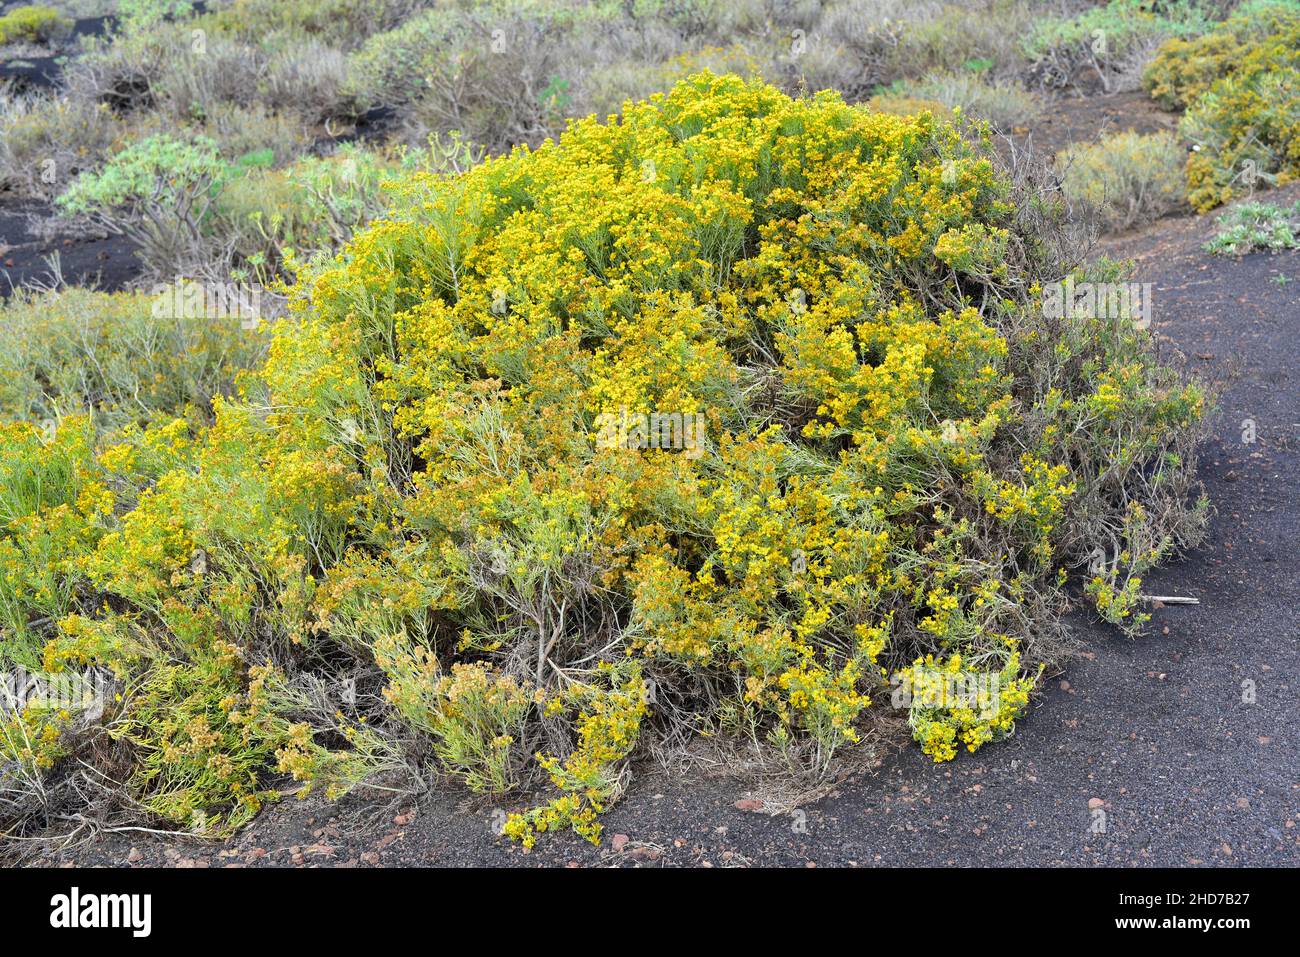 Salado blanco or dama (Schizogyne sericea) is a shrub endemic to Macaronesia (Canary Islands and Savage Islands). This photo was taken in Stock Photo